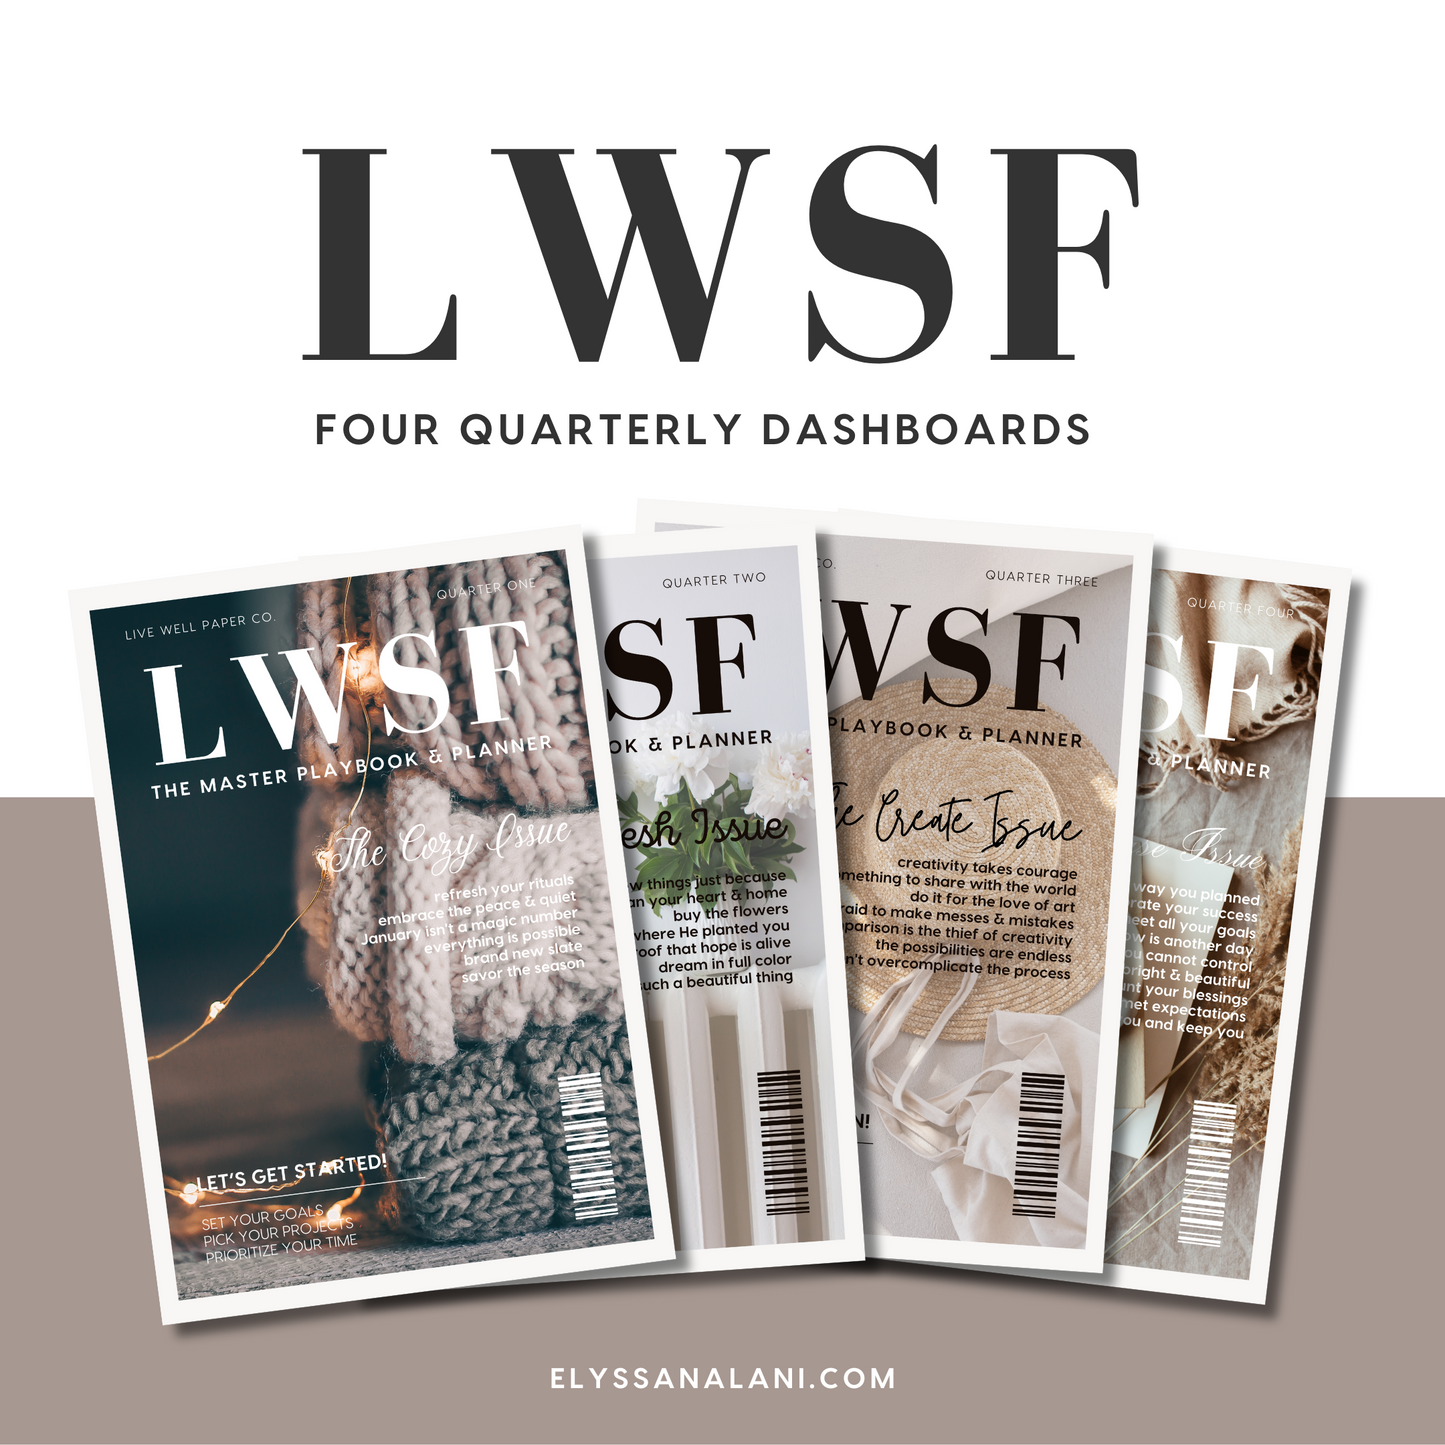 A5 LWSF Master Playbook & Planner